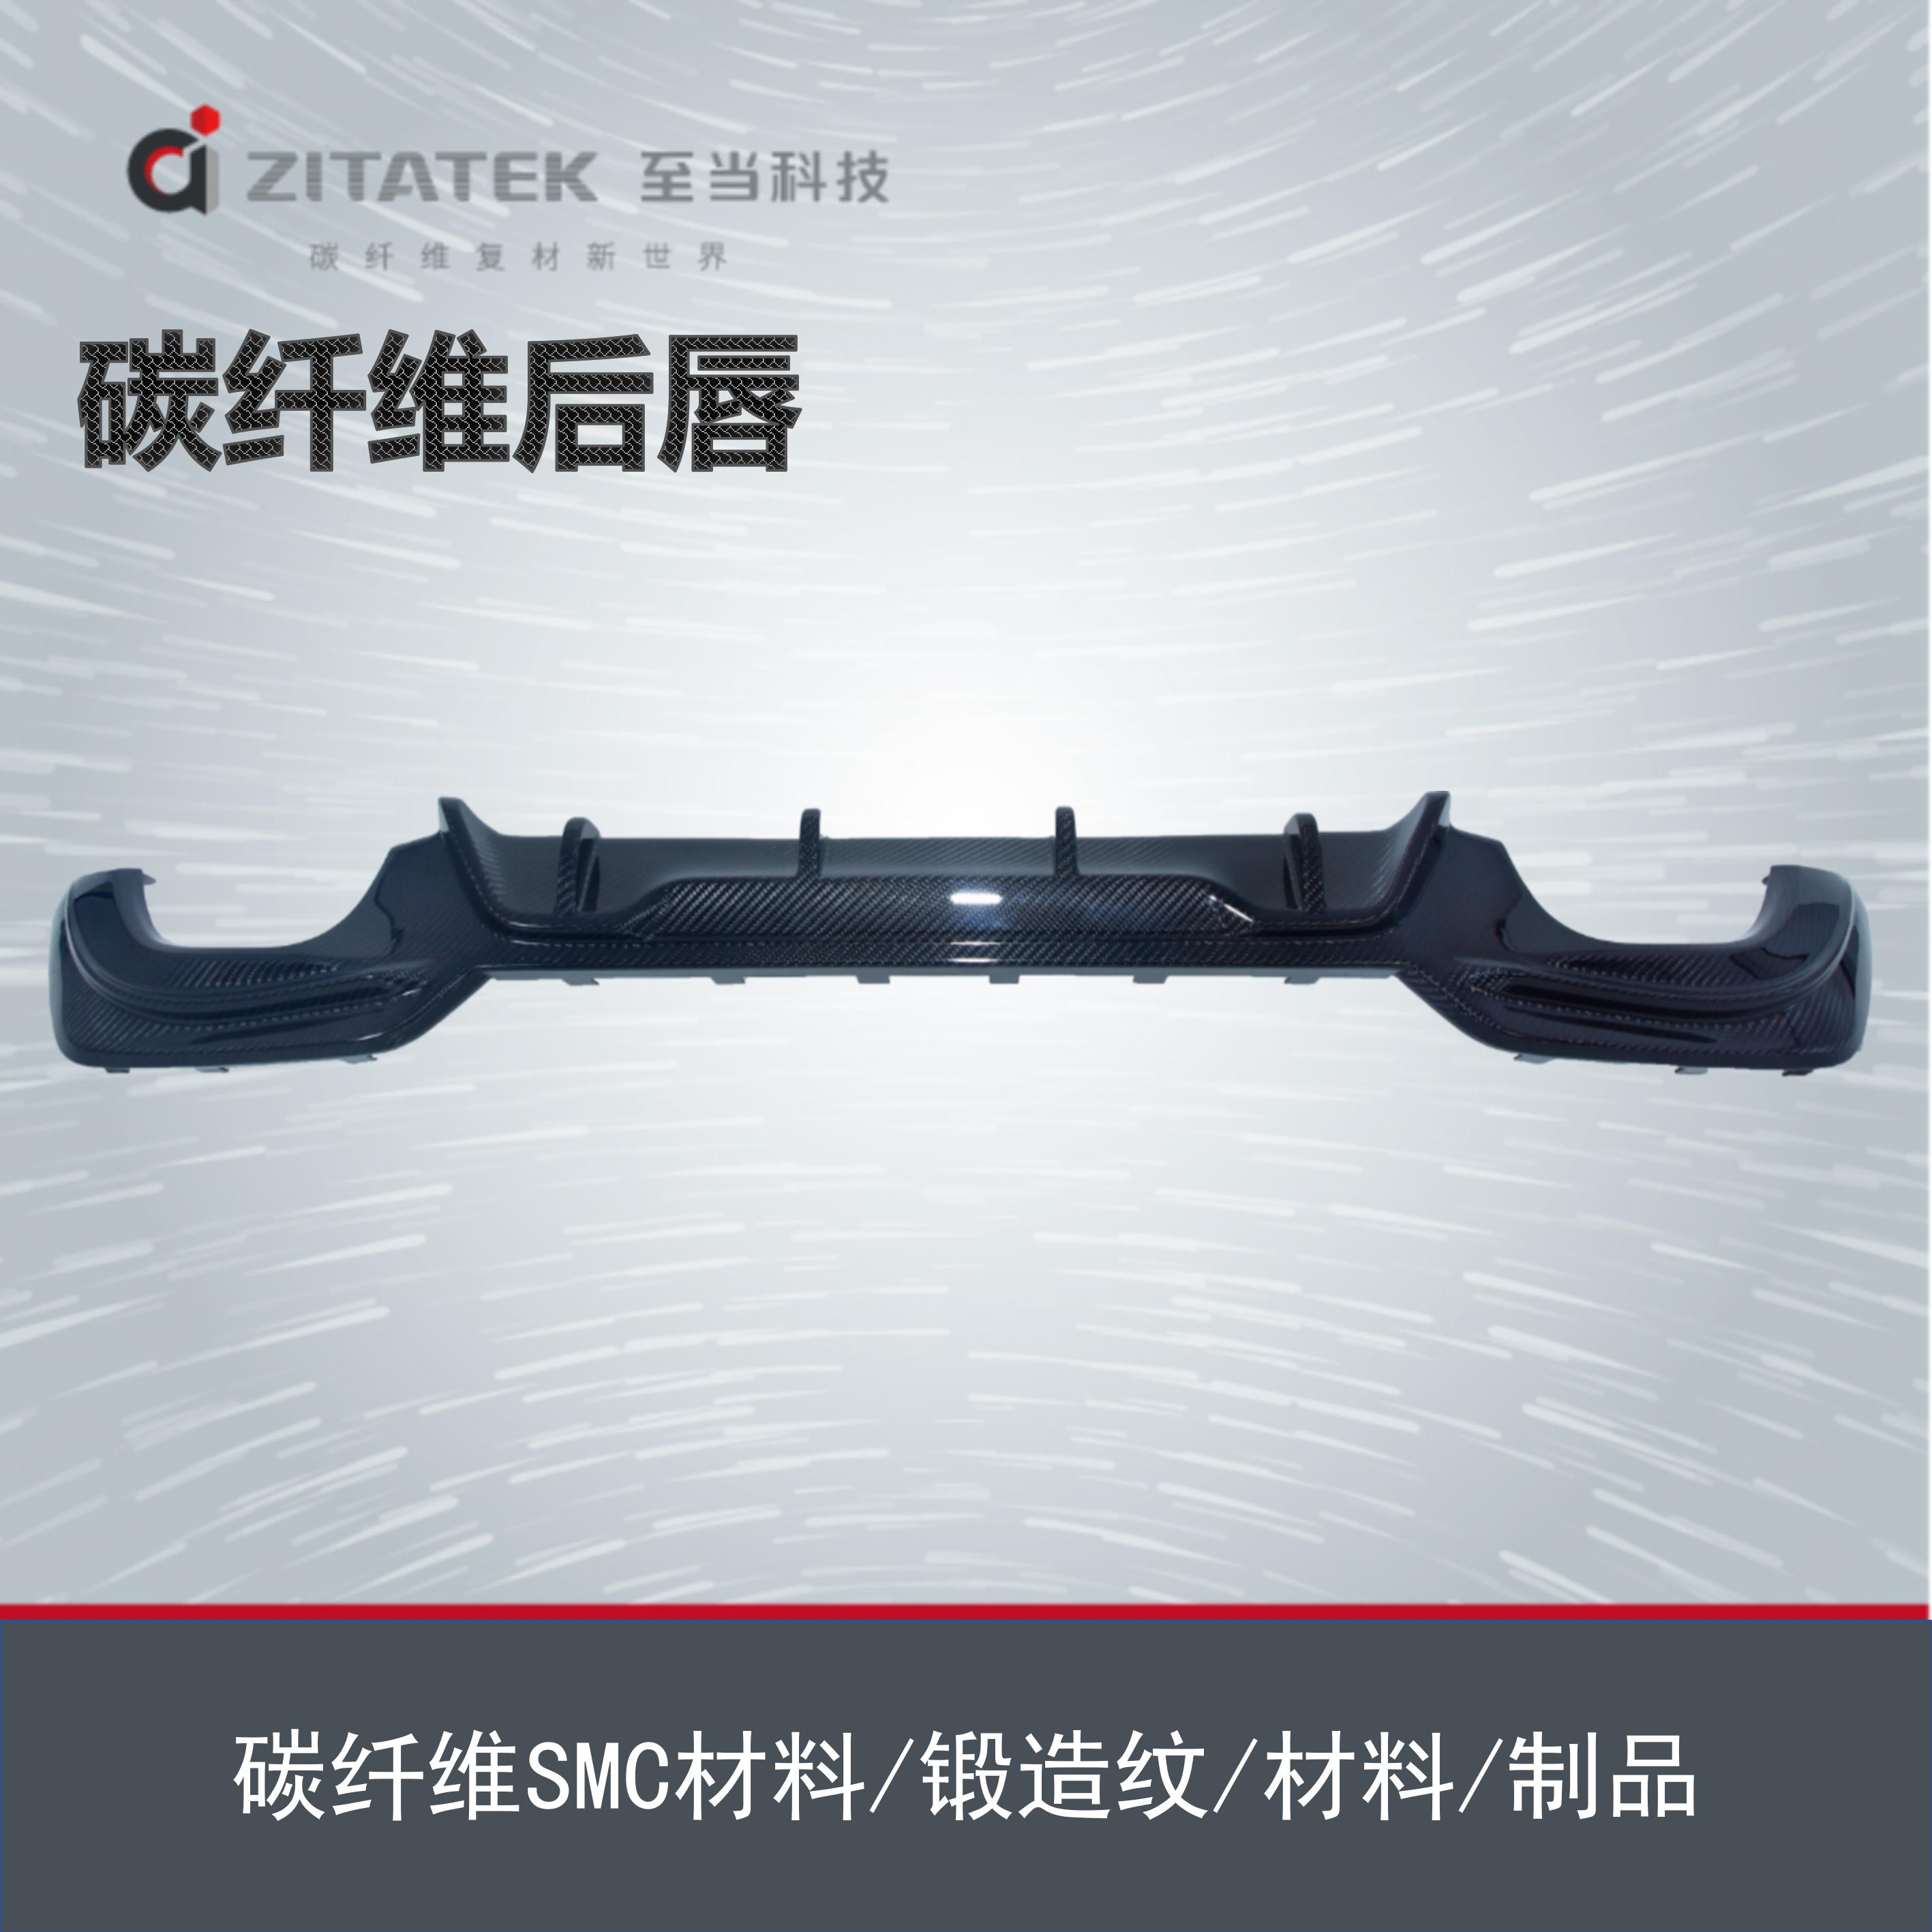 CF-SMC products, short cut carbon fiber products, forged patterns, fatigue resistance, wear resistance, and suitable production supply